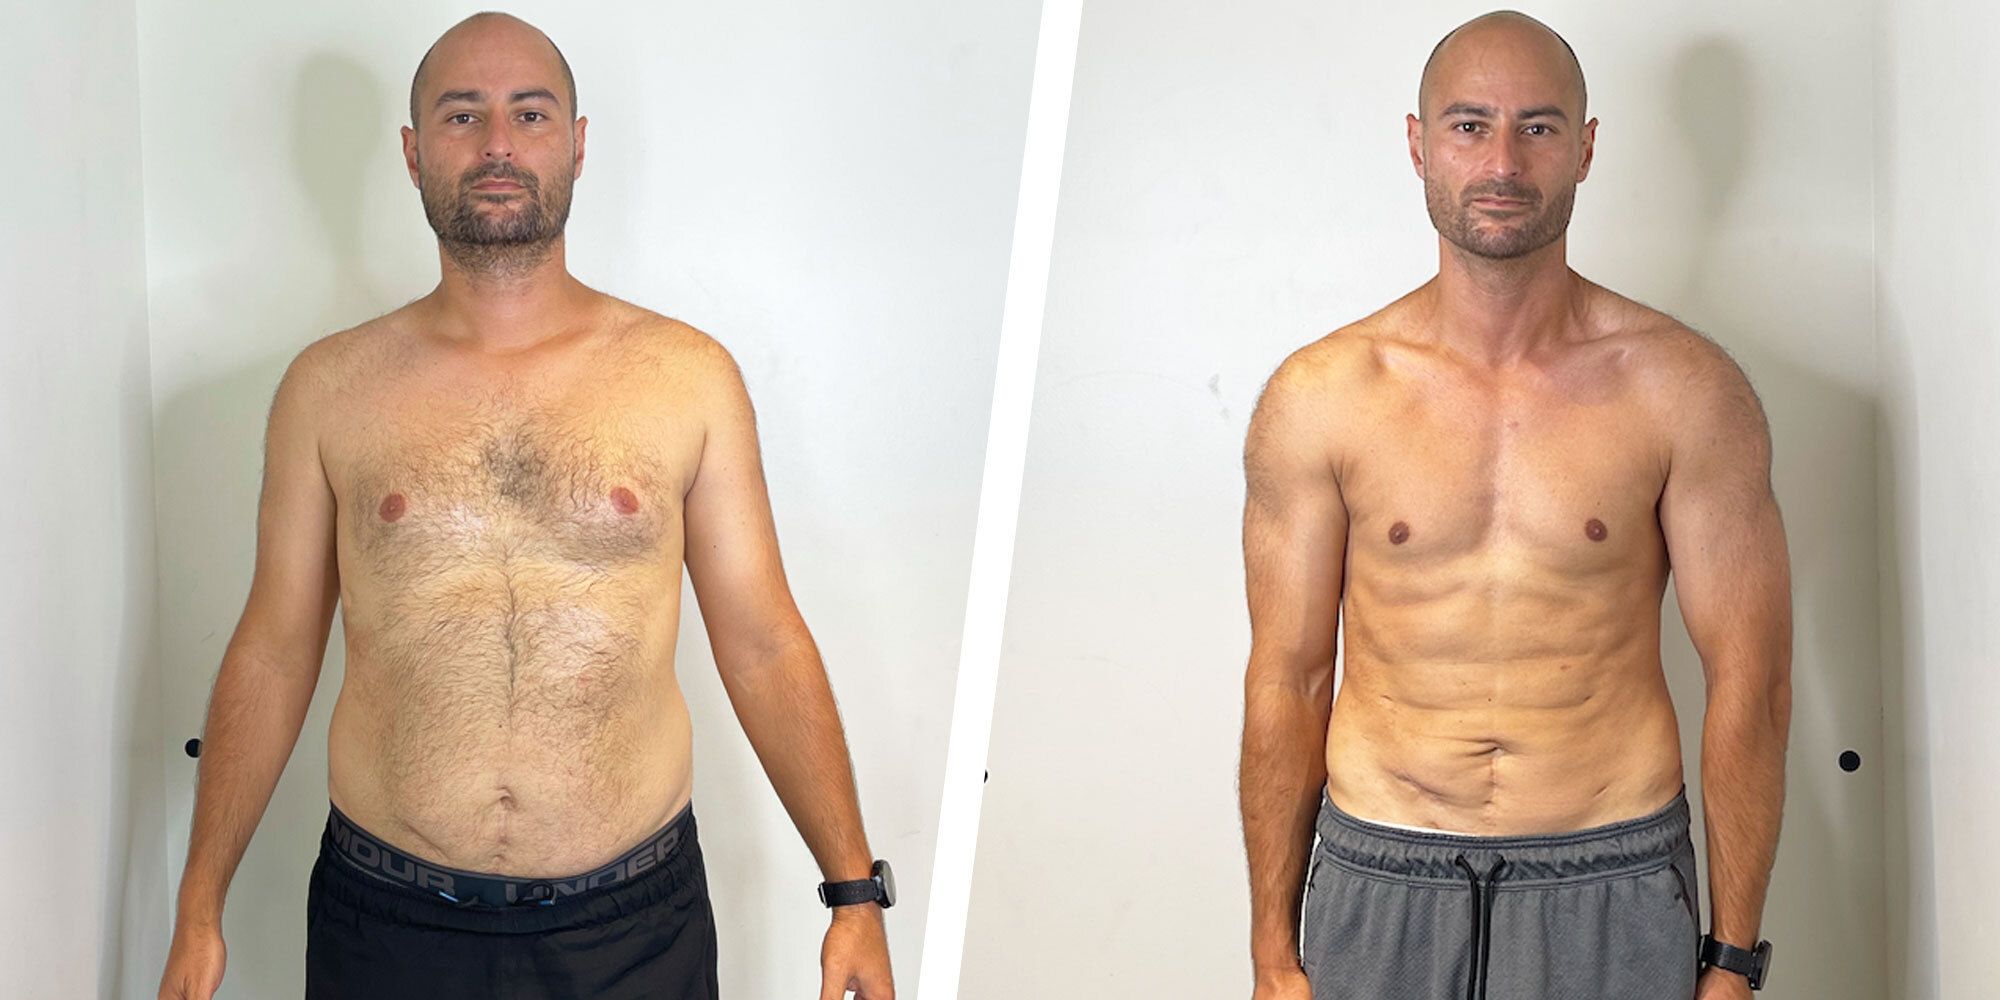 I Couldn’t Train My Abs for 10 Years. Now I Have a Six-Pack.